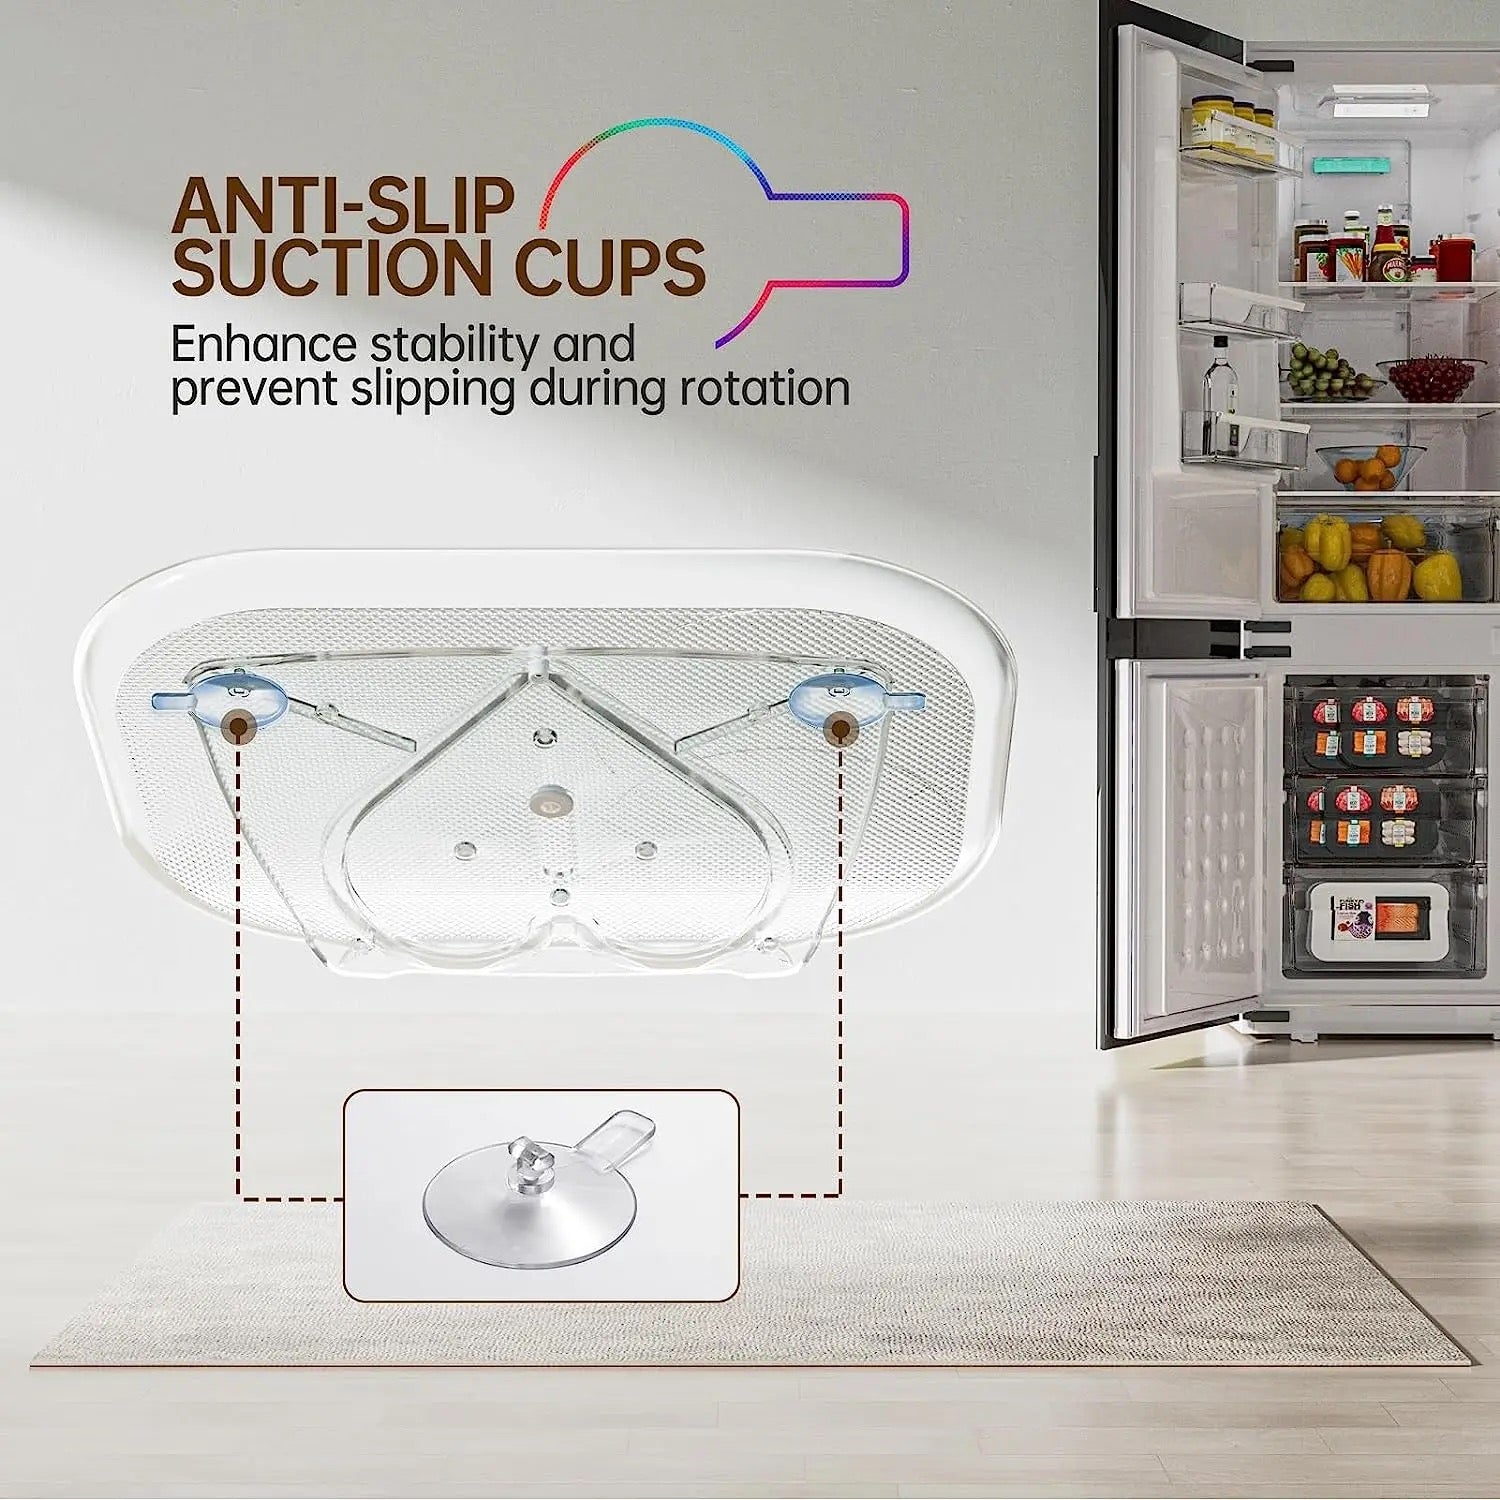 Image pointing out the Anti-Slip Suction Cups of in 360° Rotating Fridge Tray 